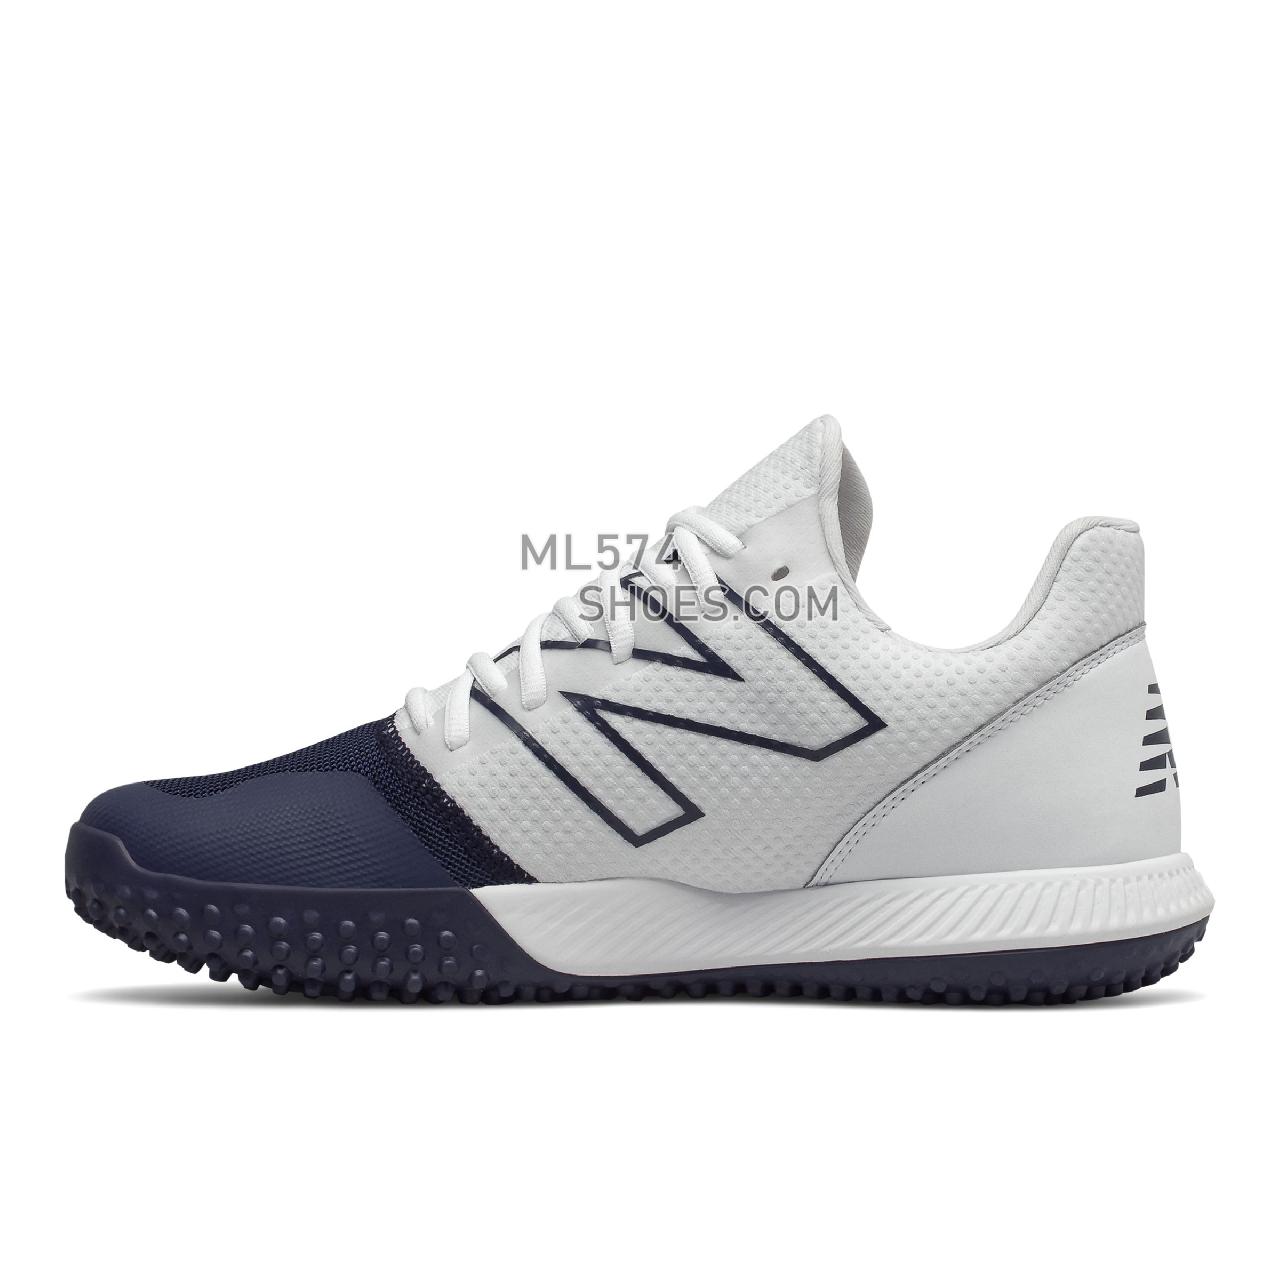 New Balance FuelCell 4040 v6 Turf Trainer - Men's Baseball Turf - Team Navy with White - T4040TN6